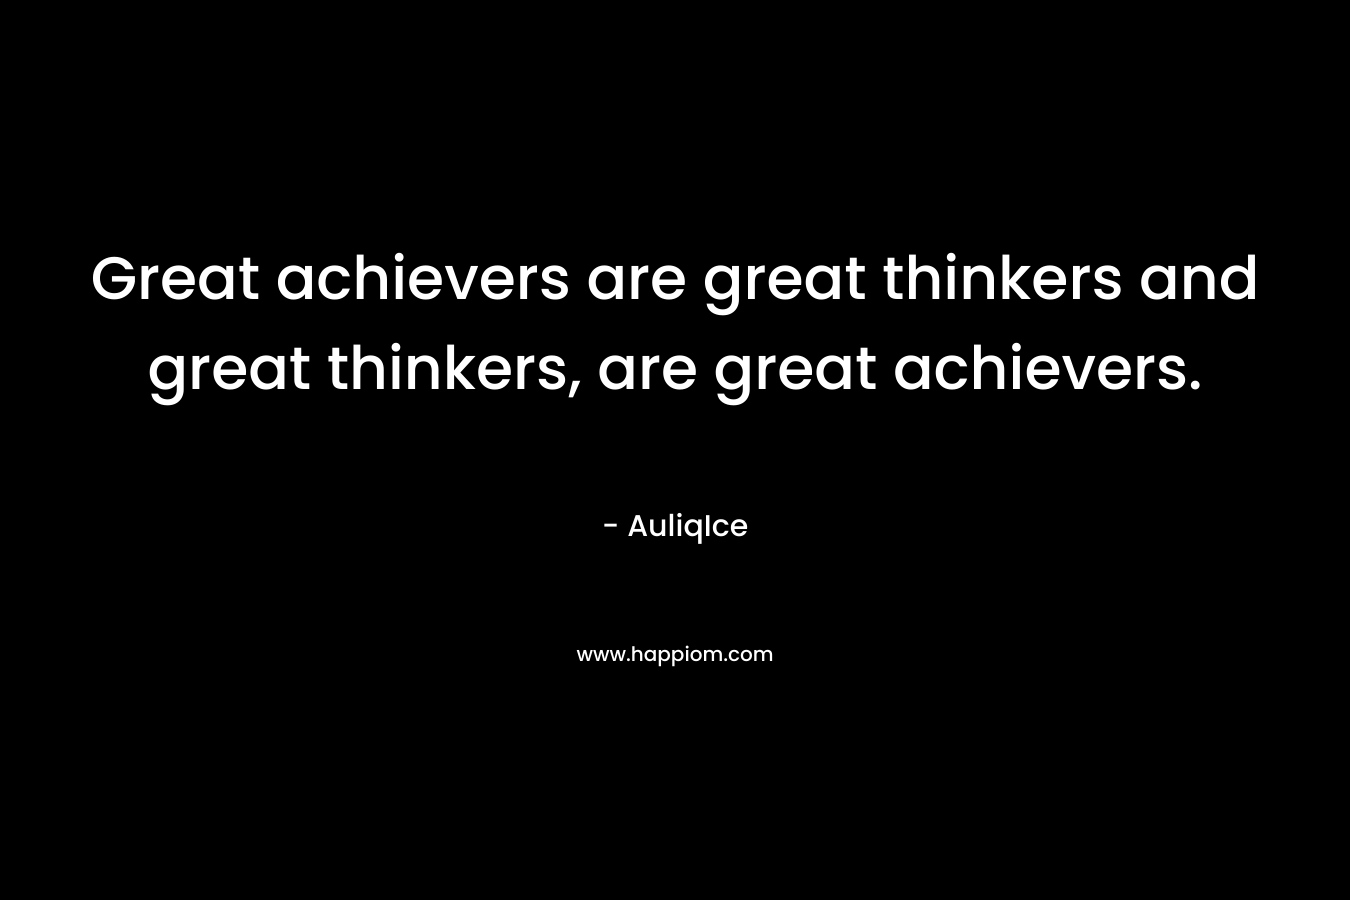 Great achievers are great thinkers and great thinkers, are great achievers.